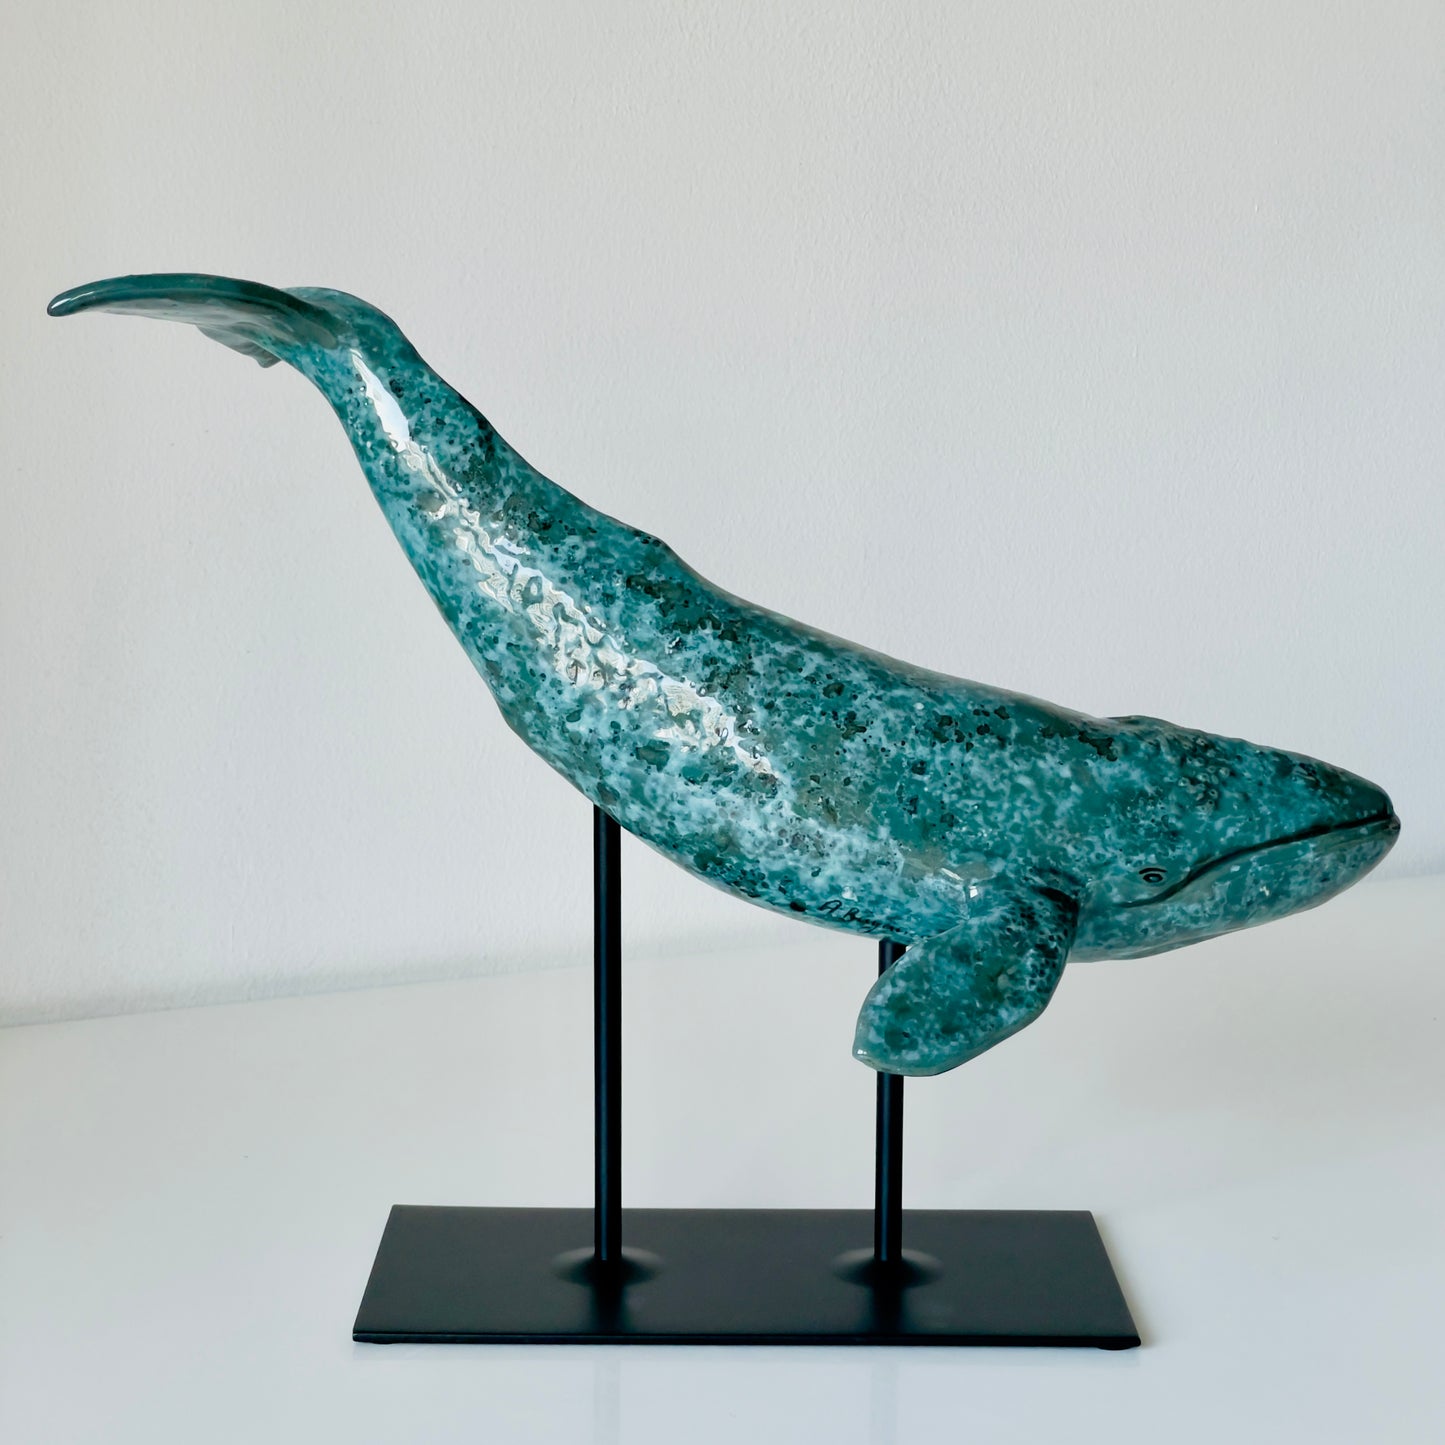 Gray whale sculpture on a metal stand